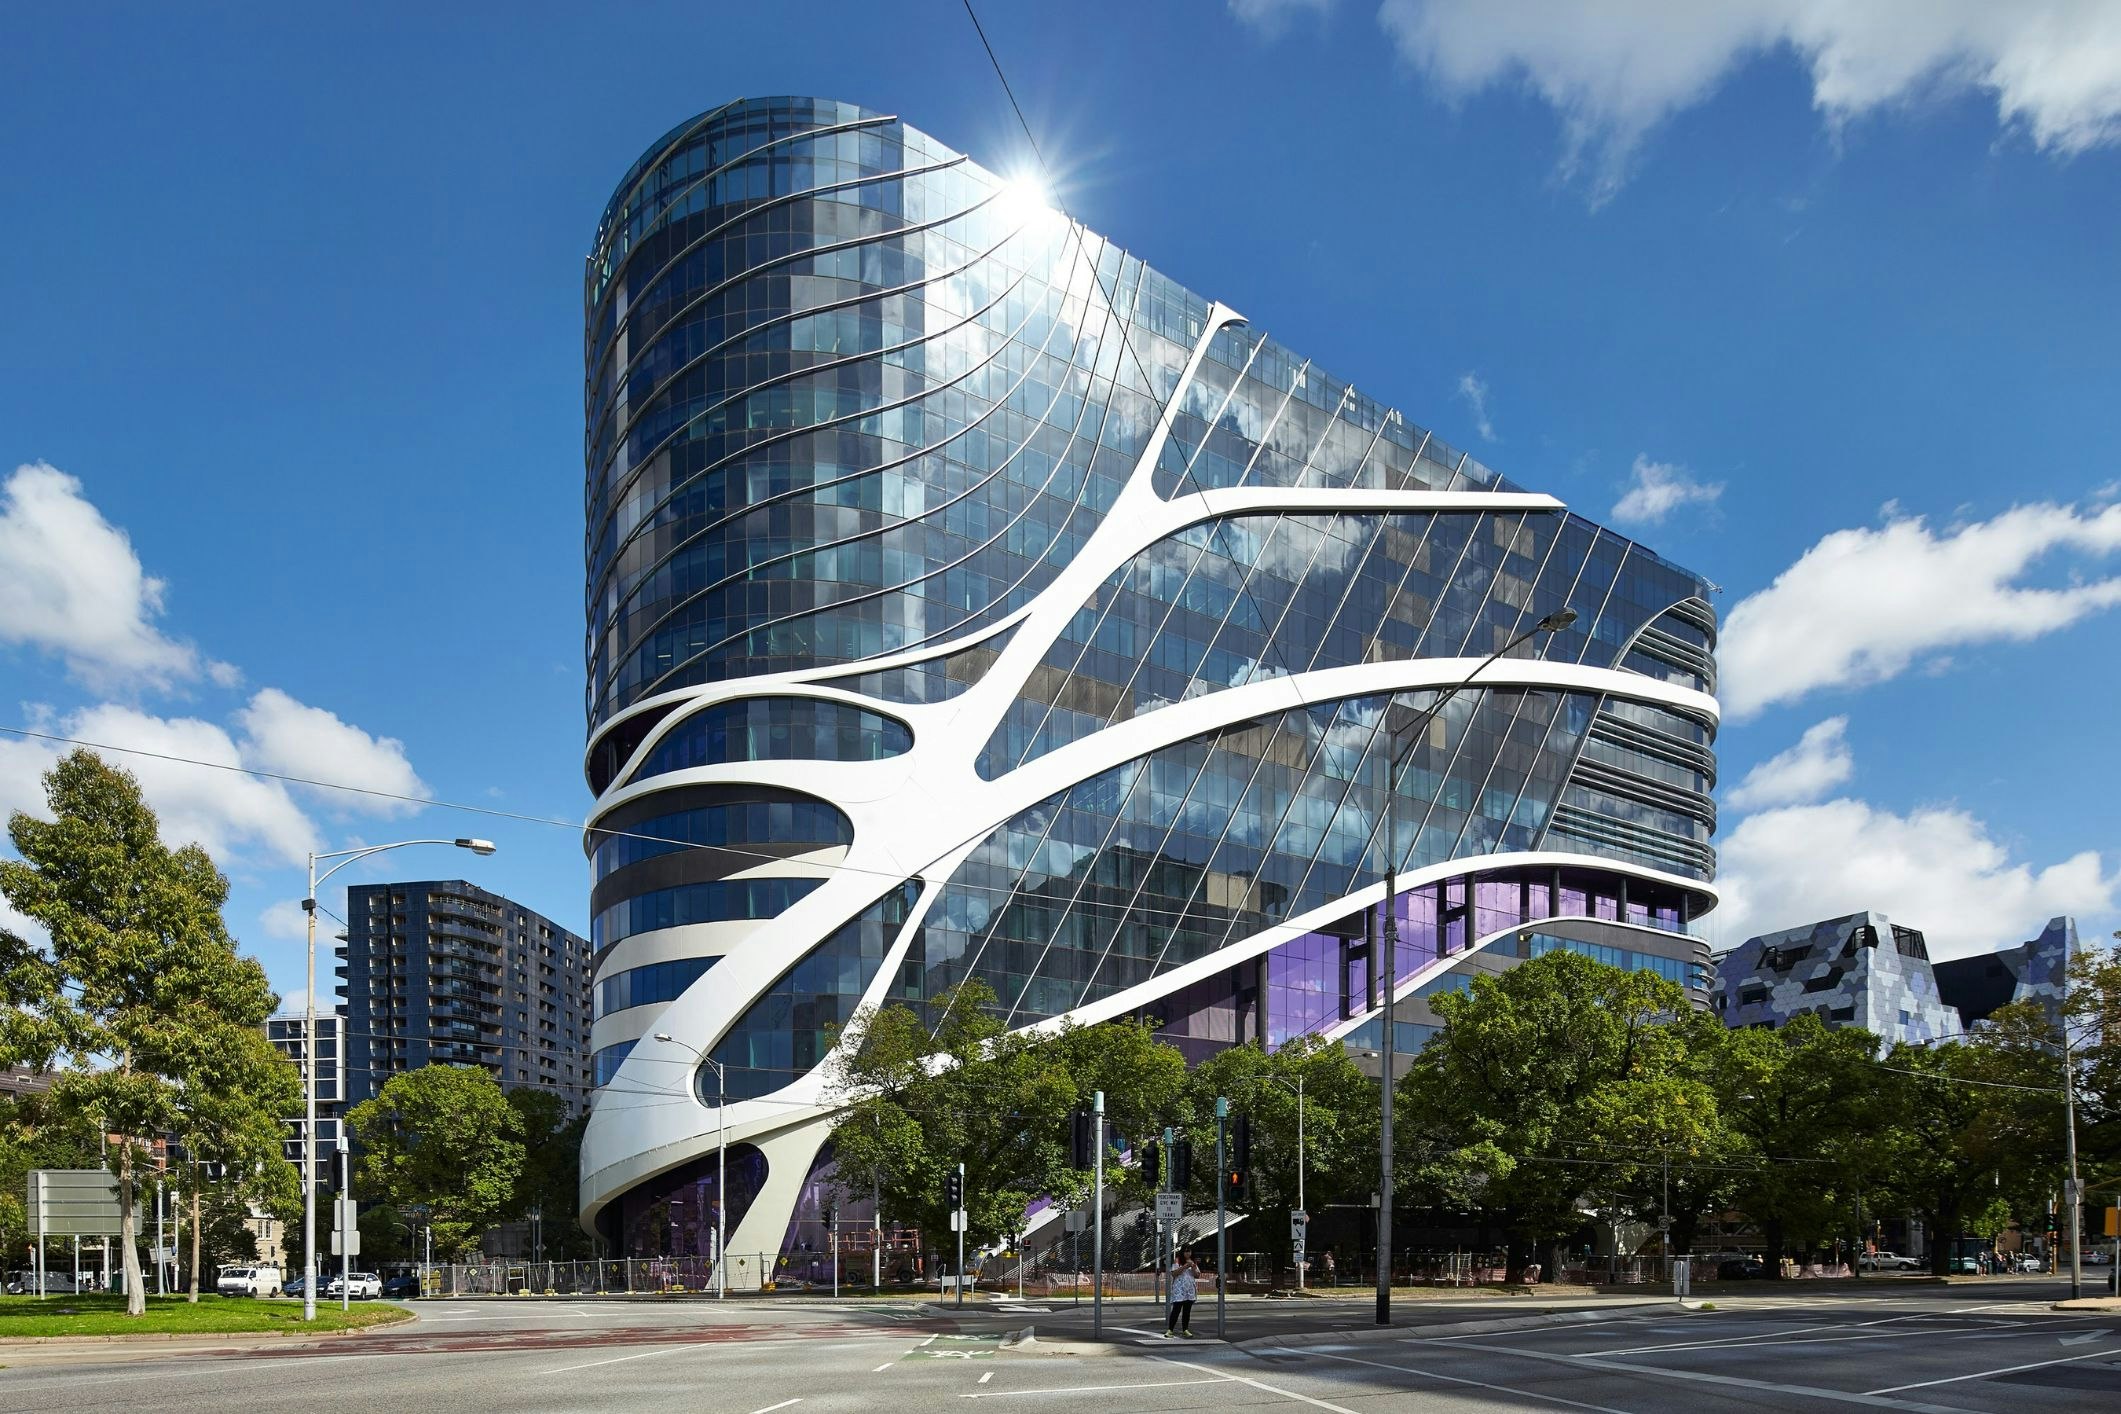 <p>The BindiMaps app can assist with navigating a busy hospital and access key areas at the Peter MacCallum Cancer Centre. [Source: Supplied]</p>
